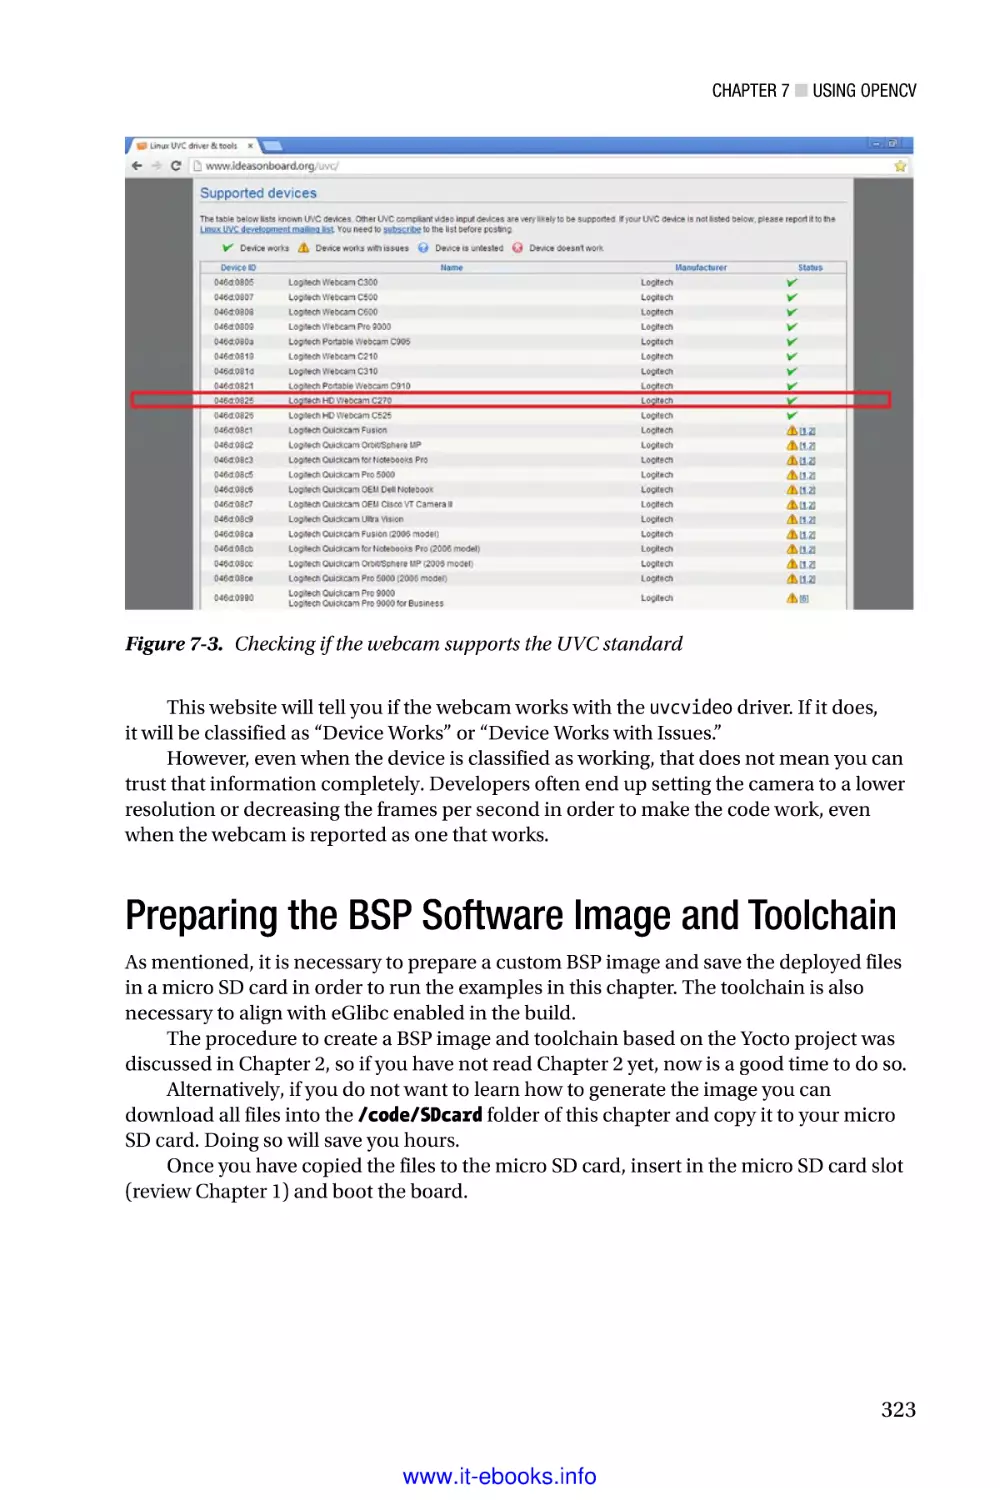 Preparing the BSP Software Image and Toolchain